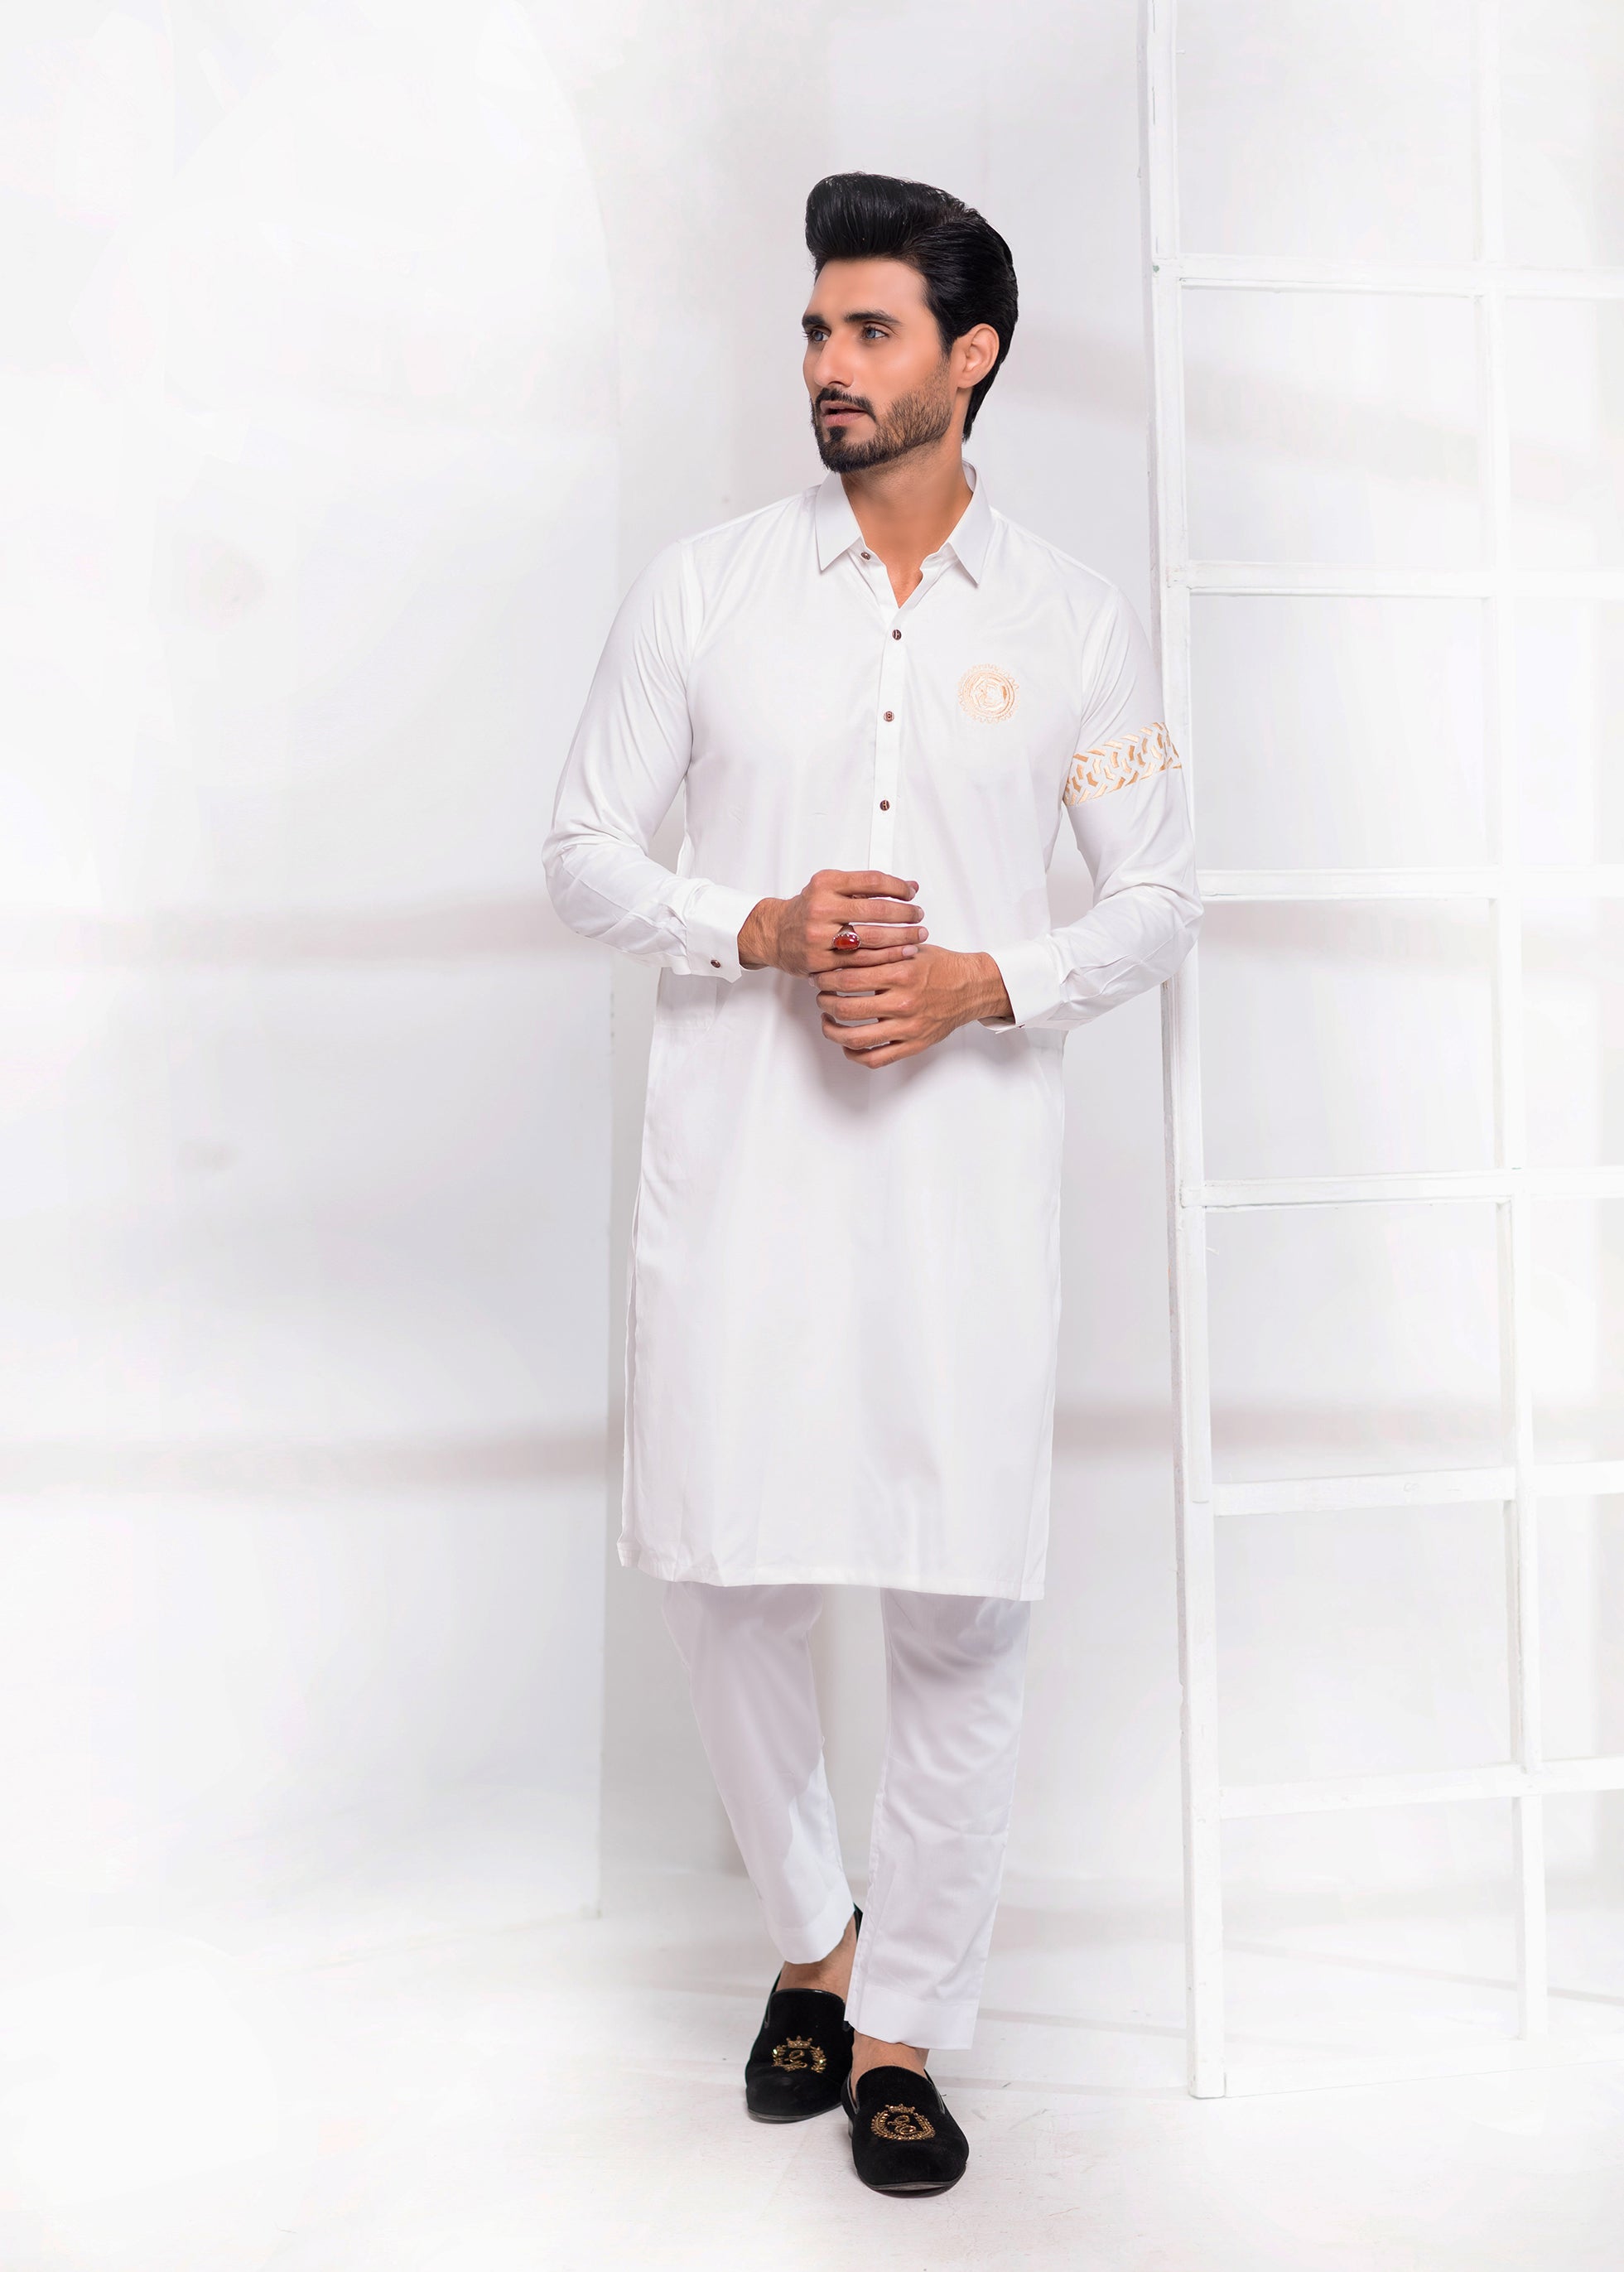 Off-White Color Signature & Sleeves Embroidered Kurta Pajama For Men